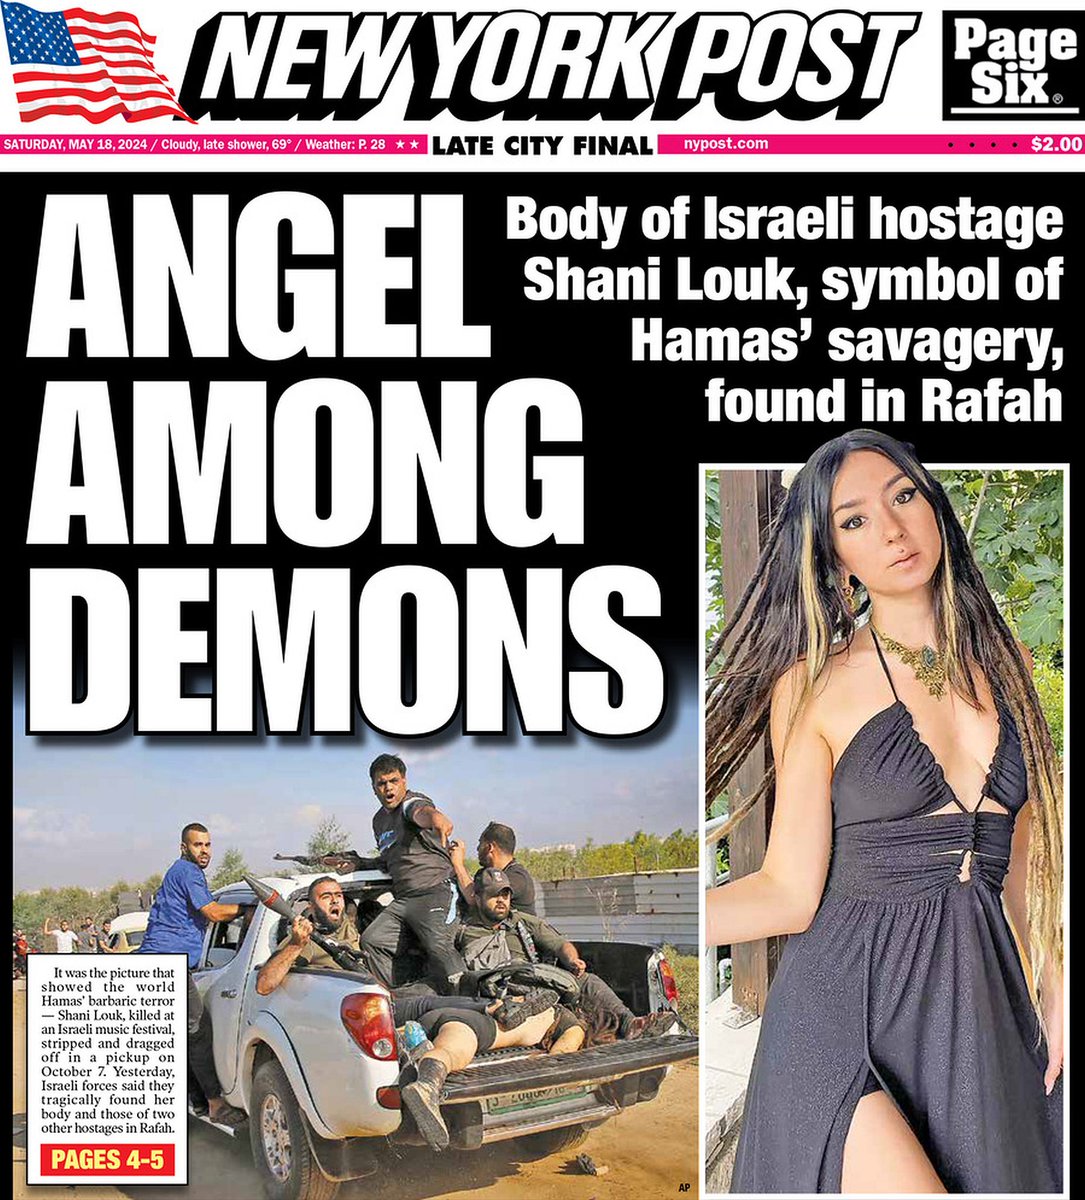 🇺🇸 Angel Among Demons ▫Shani Louk, symbol of Oct. 7 Hamas savagery, found dead in Rafah along with bodies of 2 other Israeli hostages ▫Chris Nesi & @dgeigs ▫is.gd/VjTqW5 👈 #frontpagestoday #USA @nypost 🇺🇸